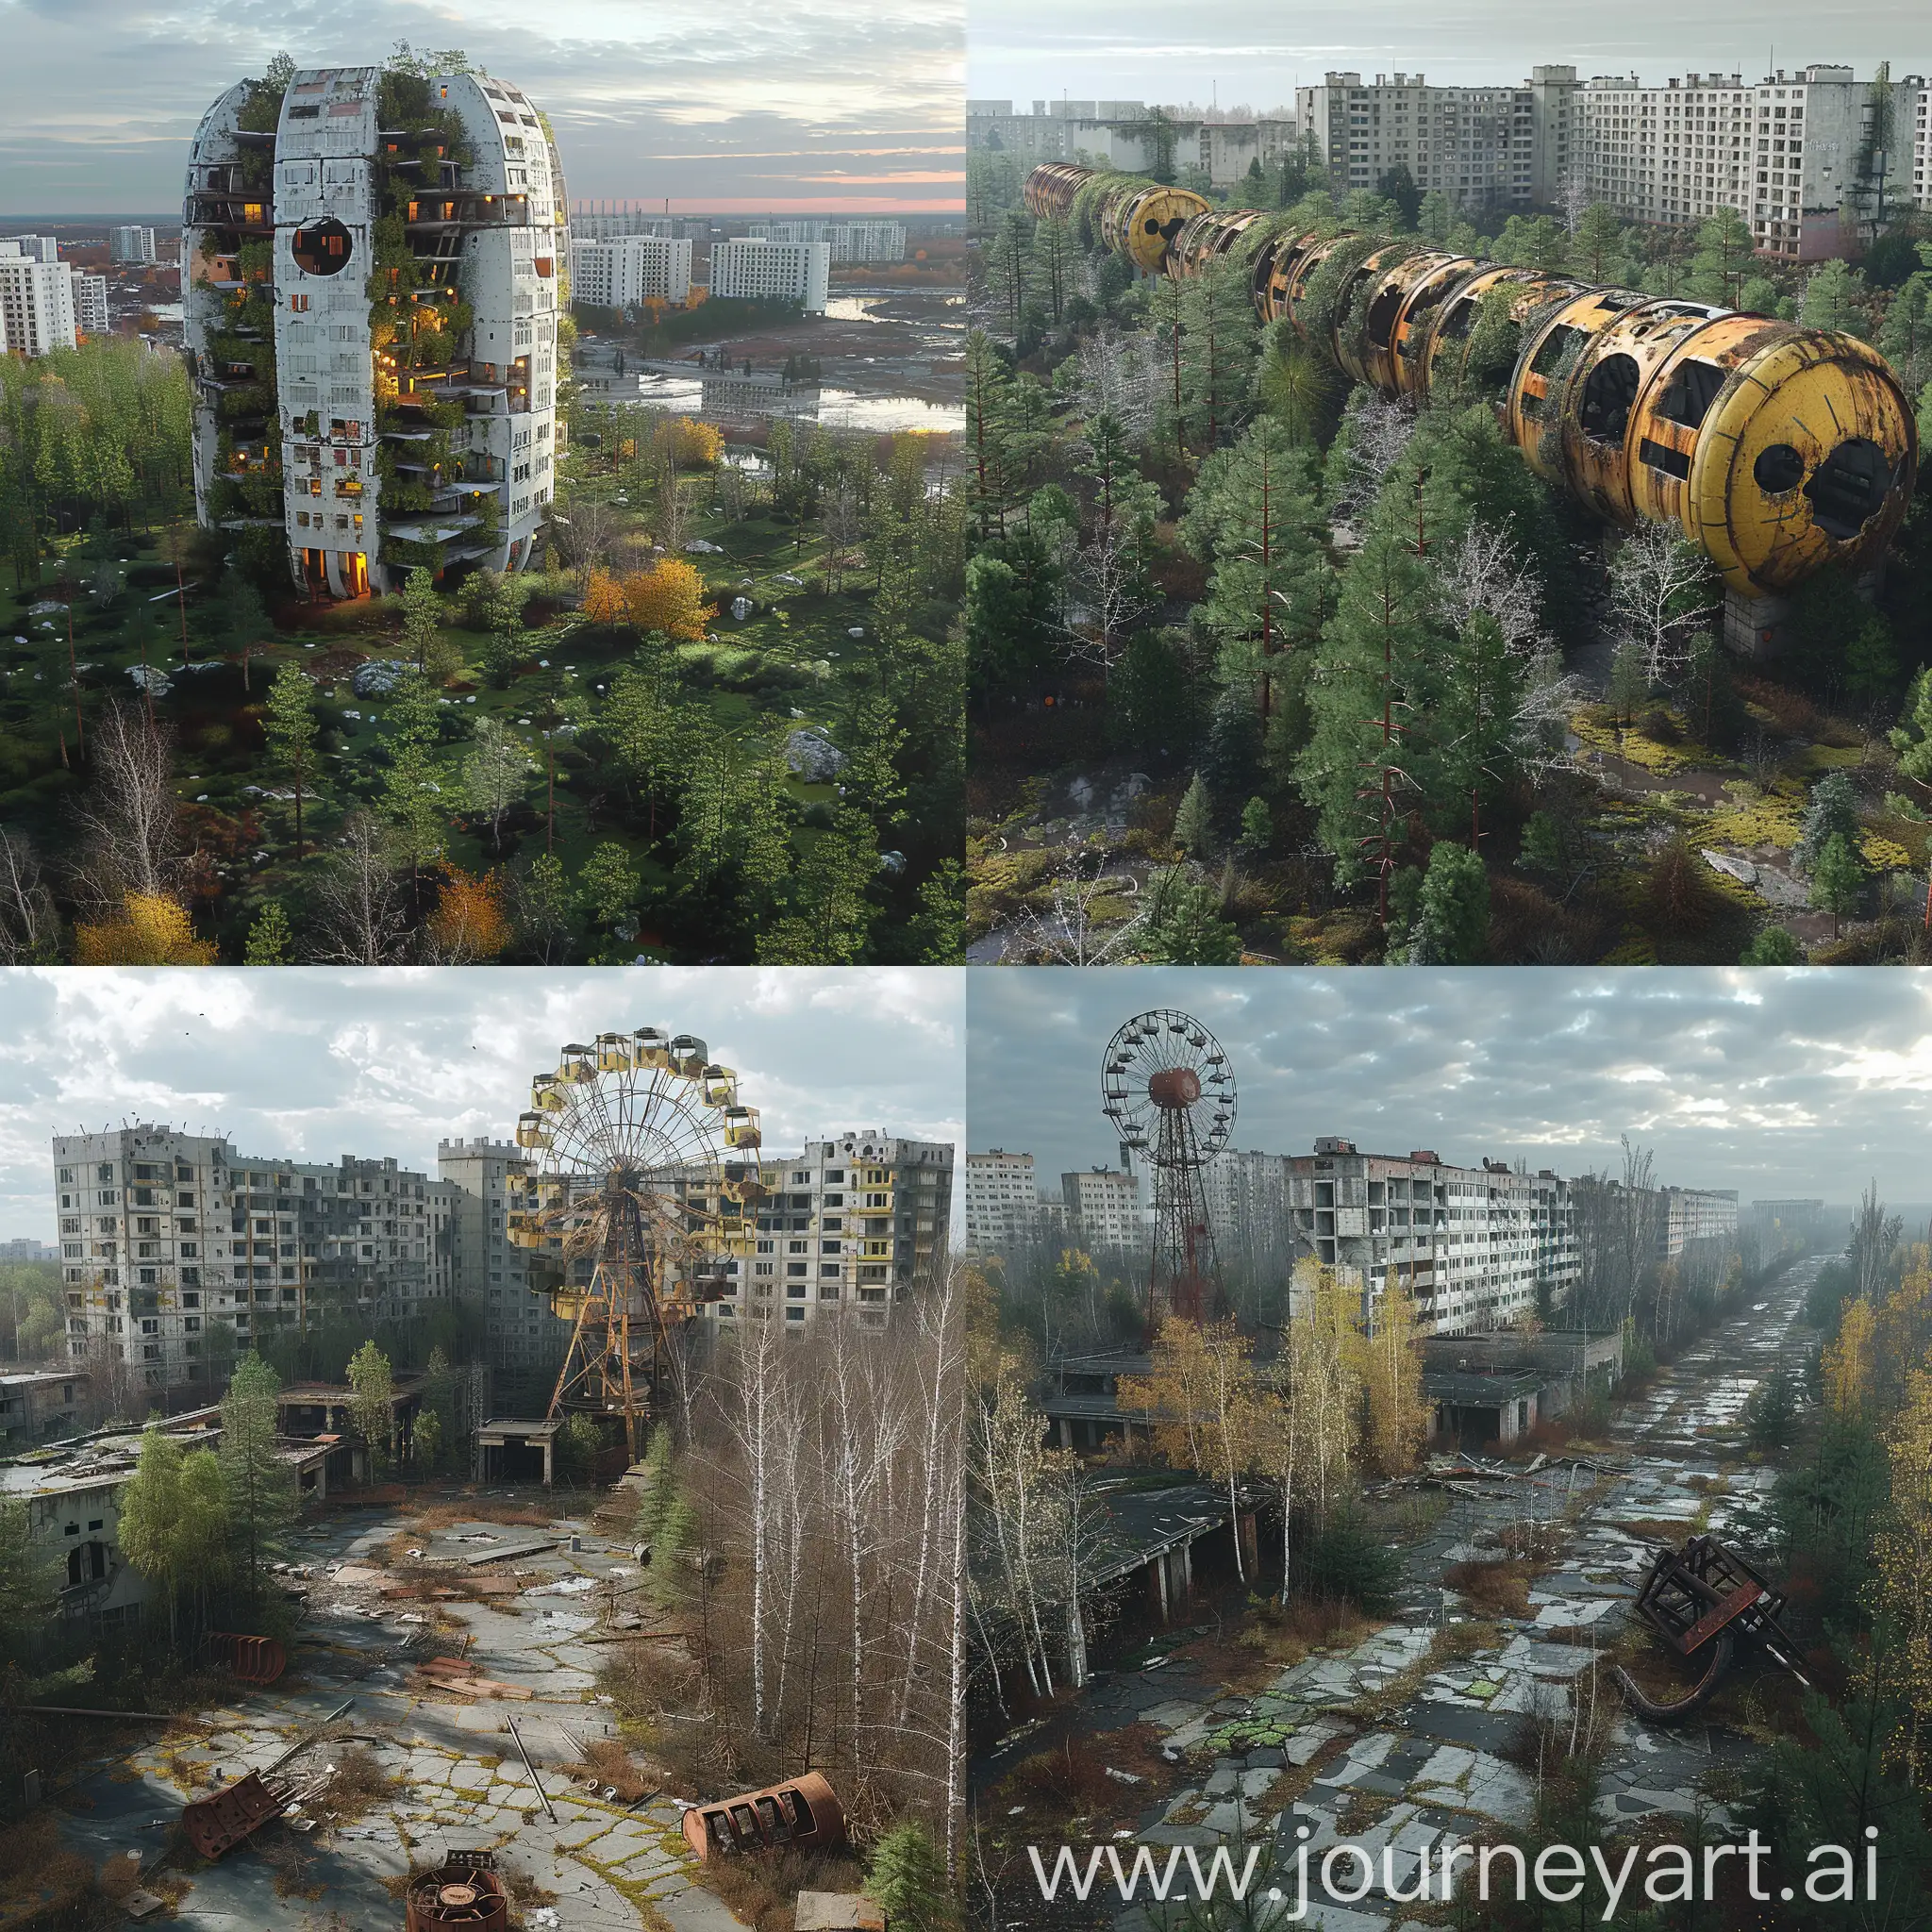 Futuristic Chernobyl https://s0.rbk.ru/v6_top_pics/media/img/0/40/756193529493400.jpg, Solar Panels, Green Roofs, Wind Turbines, Hydroponic Farming, Electric Transportation, Sustainable Materials, Sustainable Materials, Green Spaces, Energy-Efficient Buildings, Waste Management, Smart Grid Technology, Advanced Nuclear Reactors, Artificial Intelligence (AI) Monitoring Systems, Virtual Reality (VR) Training Simulations, Robotics and Drones, Bioremediation Technologies, 3D Printing Construction, Quantum Computing, Energy Storage Systems, Blockchain Technology, Nanomaterials for Radiation Protection, Nanosensors for Environmental Monitoring, Nanocatalysts for Water Purification, Nanomembranes for Filtration, Nano-Enabled Soil Remediation, Nanoparticle-Based Energy Storage, Nanoscale Coatings for Building Protection, Nanomedicine for Health Monitoring, Nanorobots for Site Cleanup, Nanotechnology-Enhanced Agriculture, octane render --stylize 1000